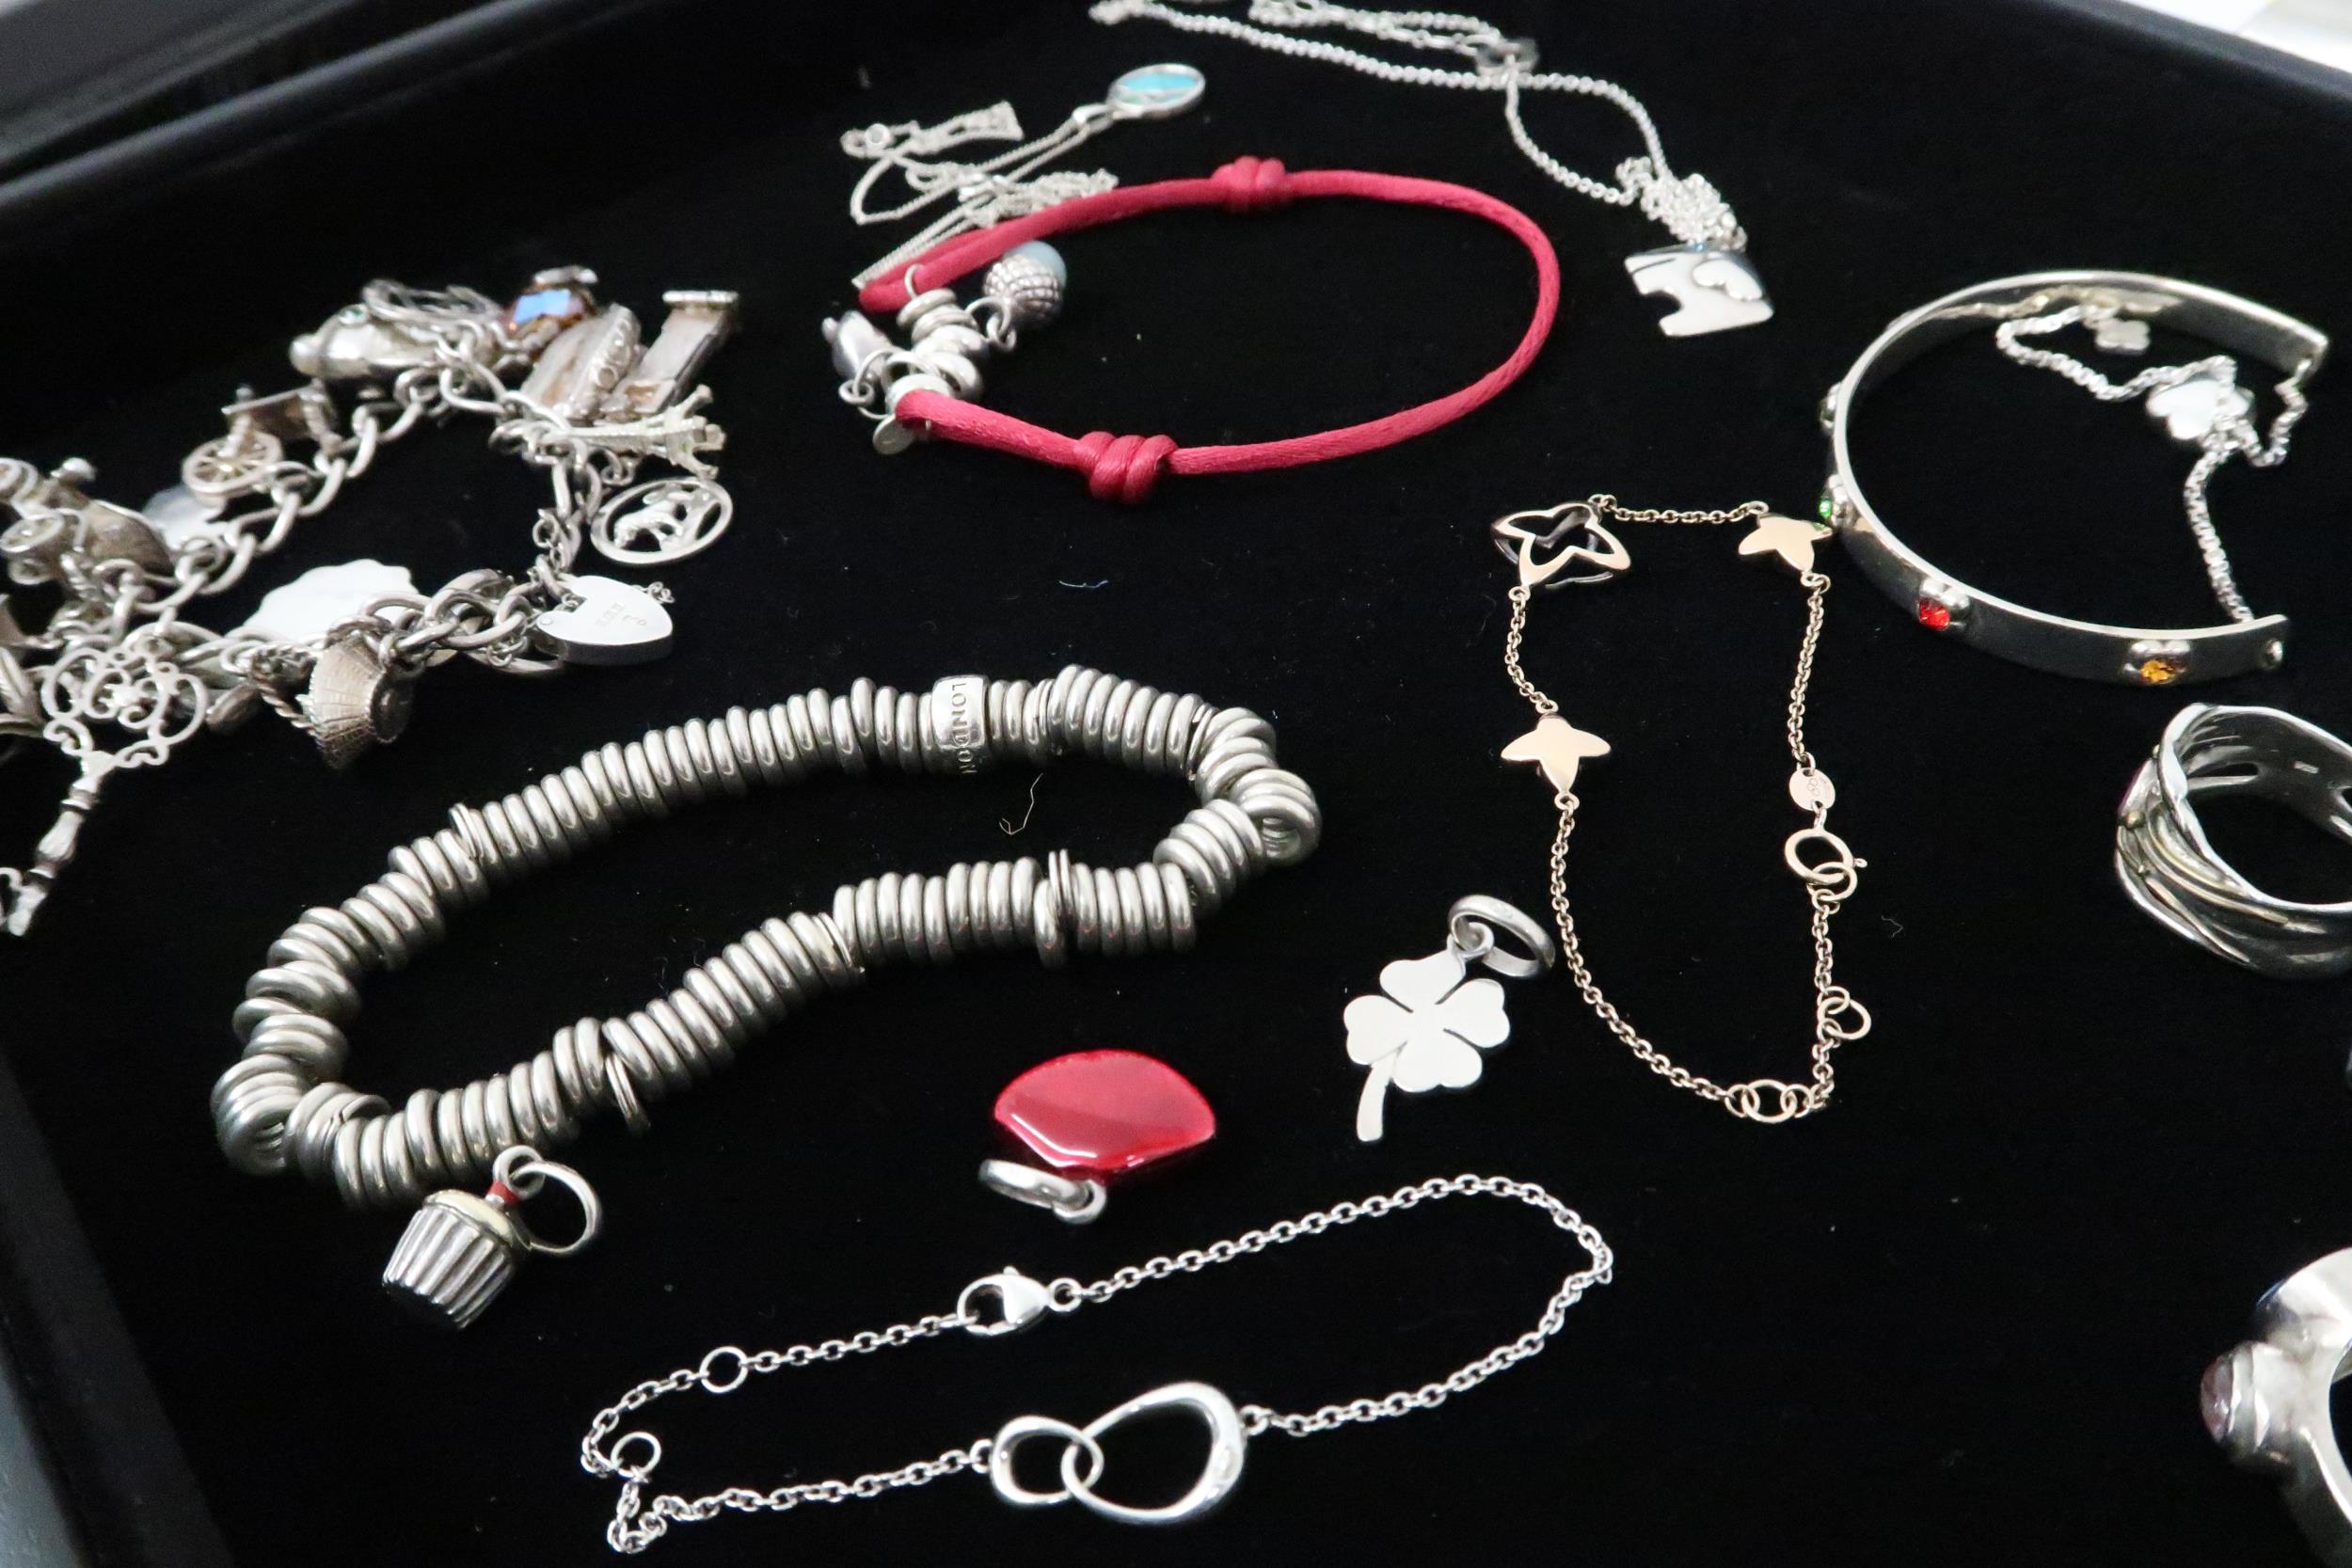 A quantity of silver jewellery: silver rings, bangles, silver charm bracelet, Links of London charms - Image 3 of 3